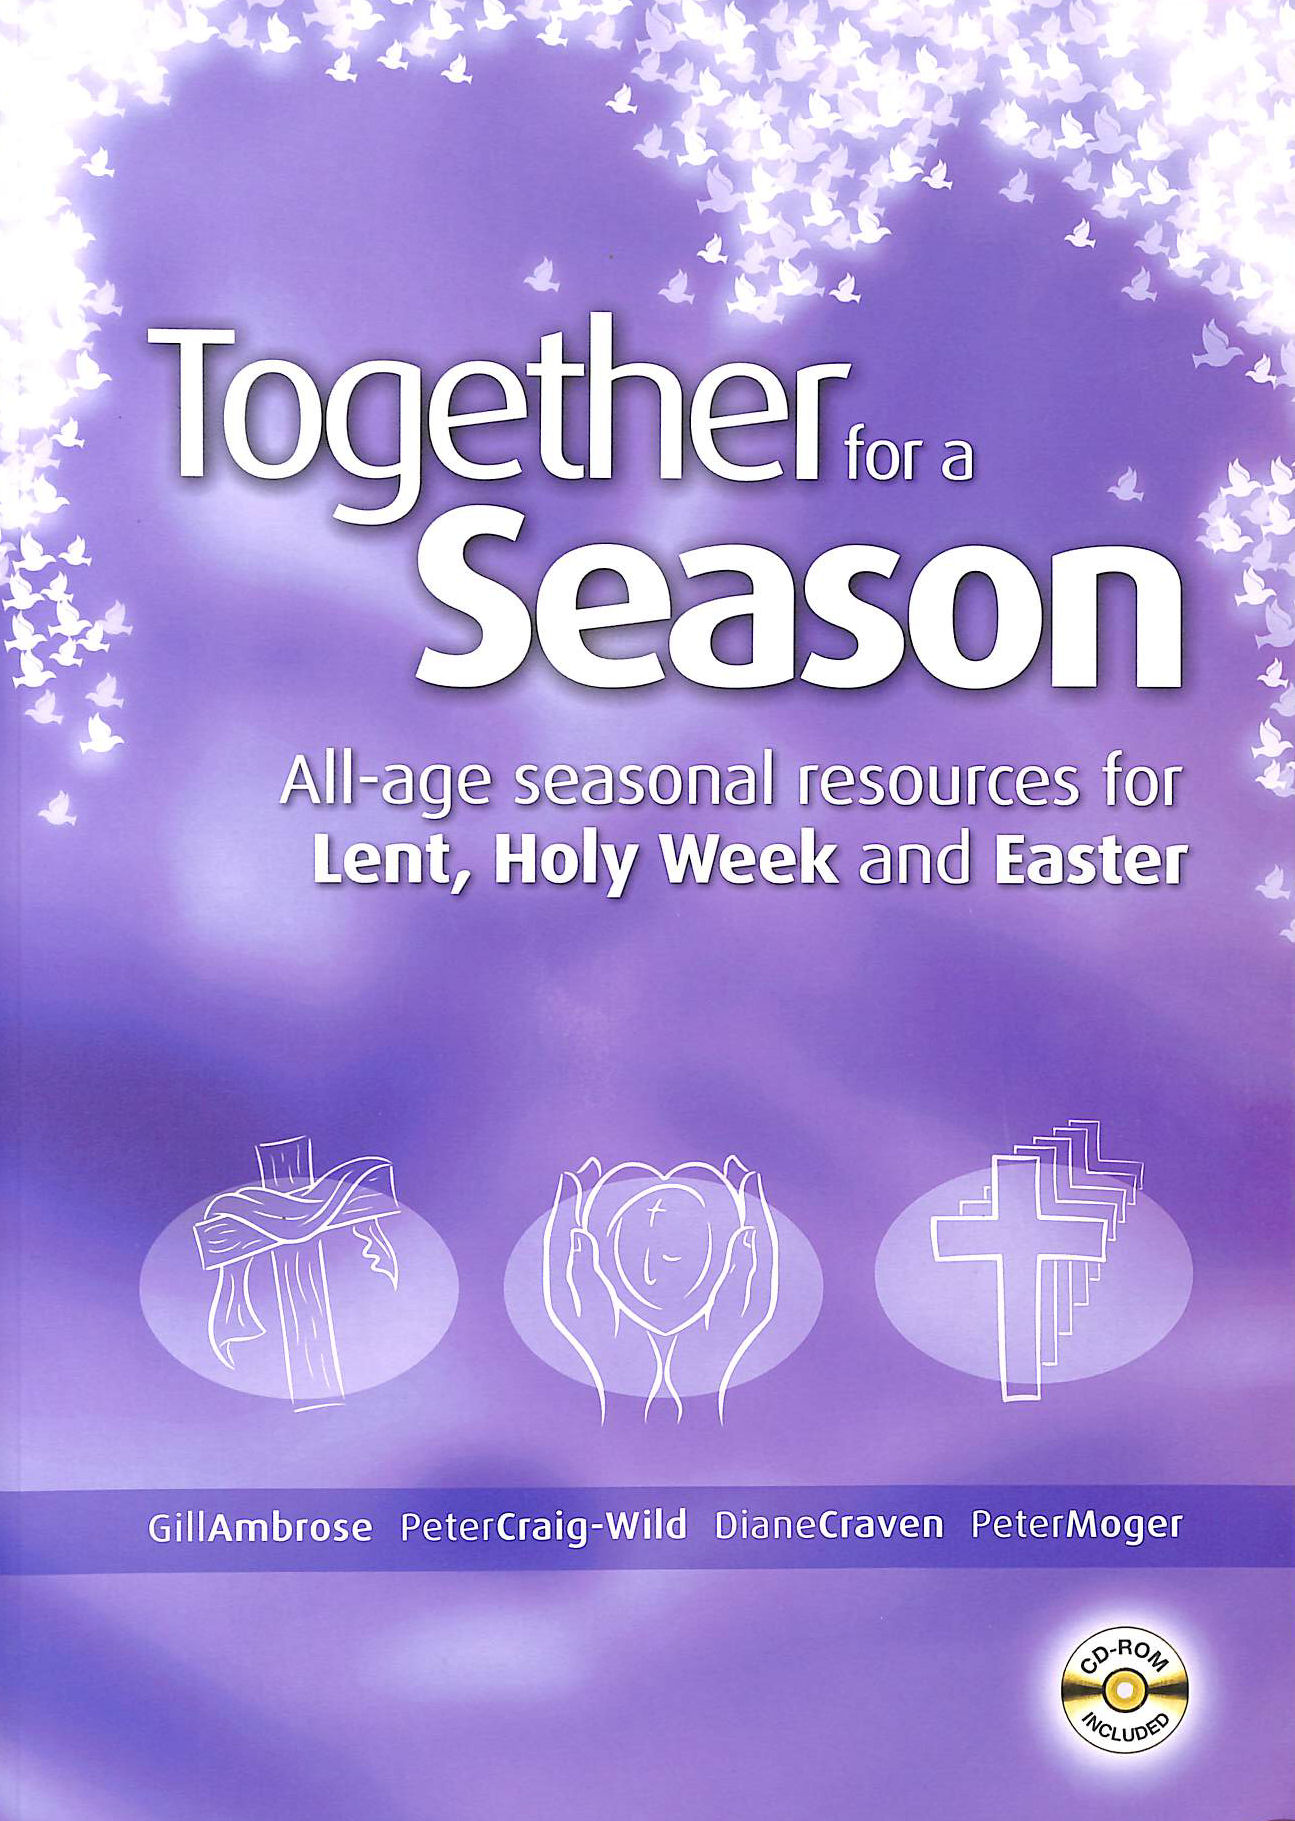 GILL AMBROSE, PETER CRAIG-WILD, DIANE CRAVEN, PETER MOGER - Together for a Season, All Age Seasonal resources for Lent, Holy Week and Easter